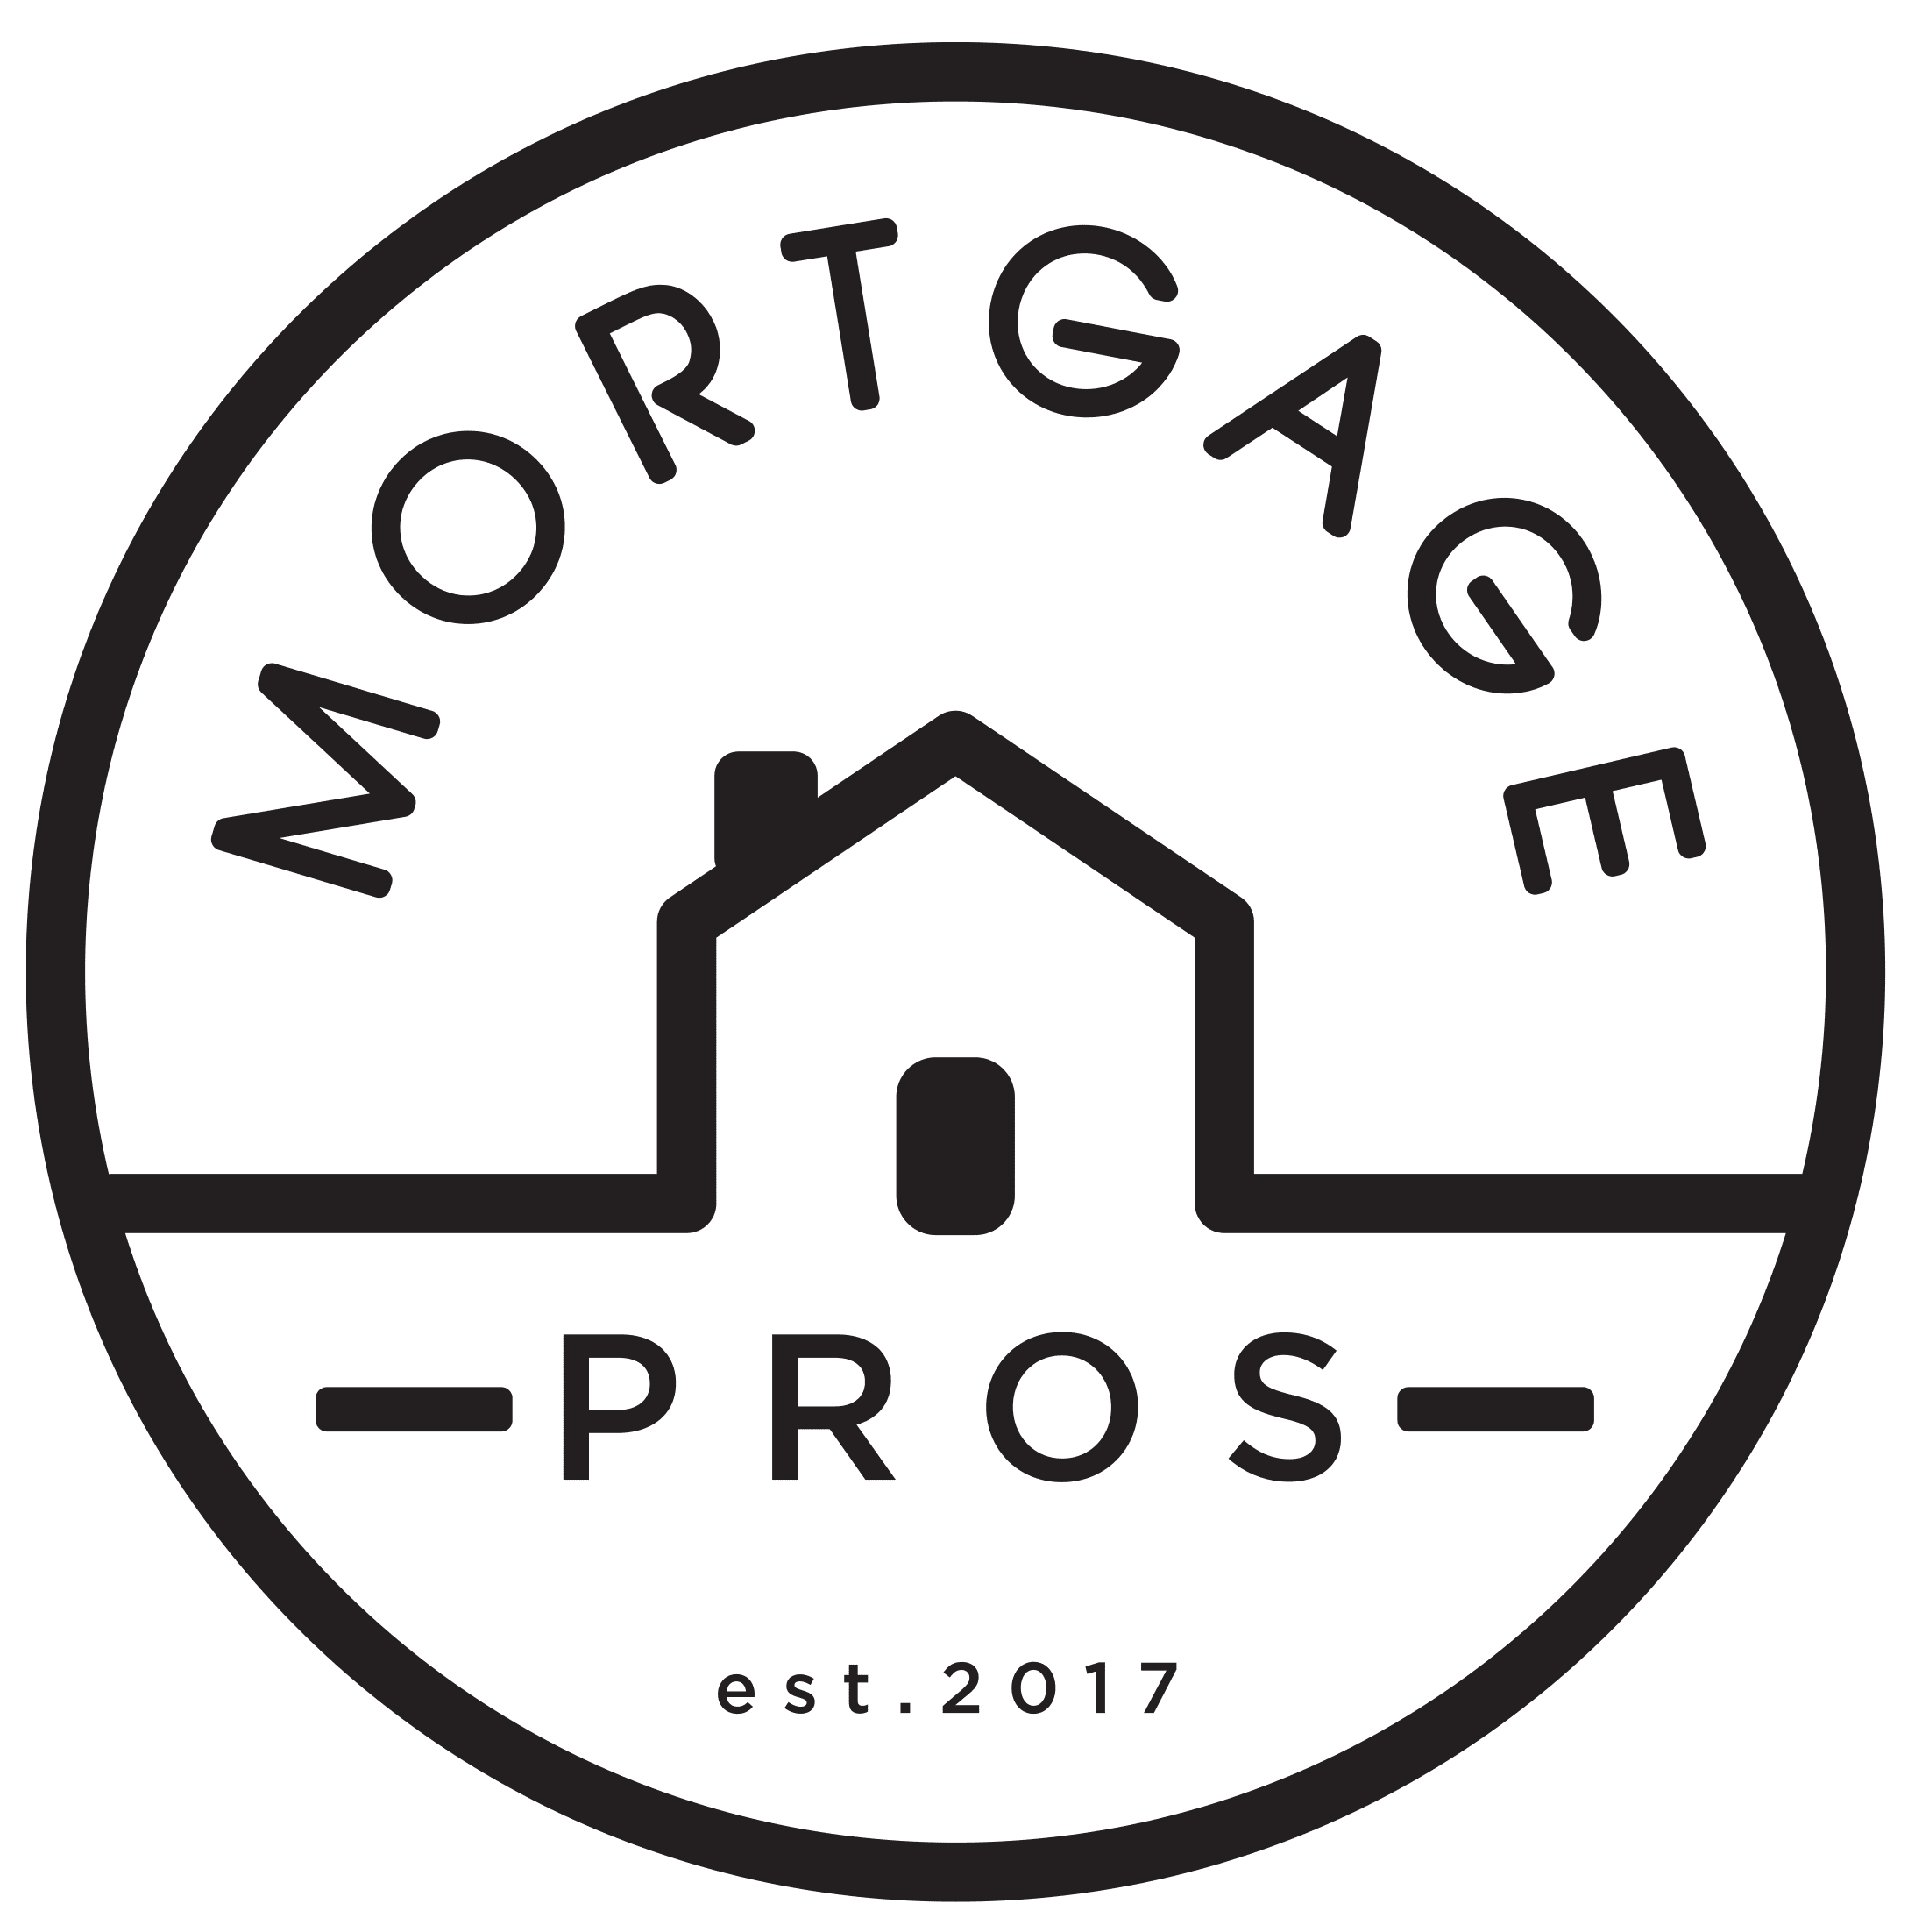 Mortgage Pros - we are RGV